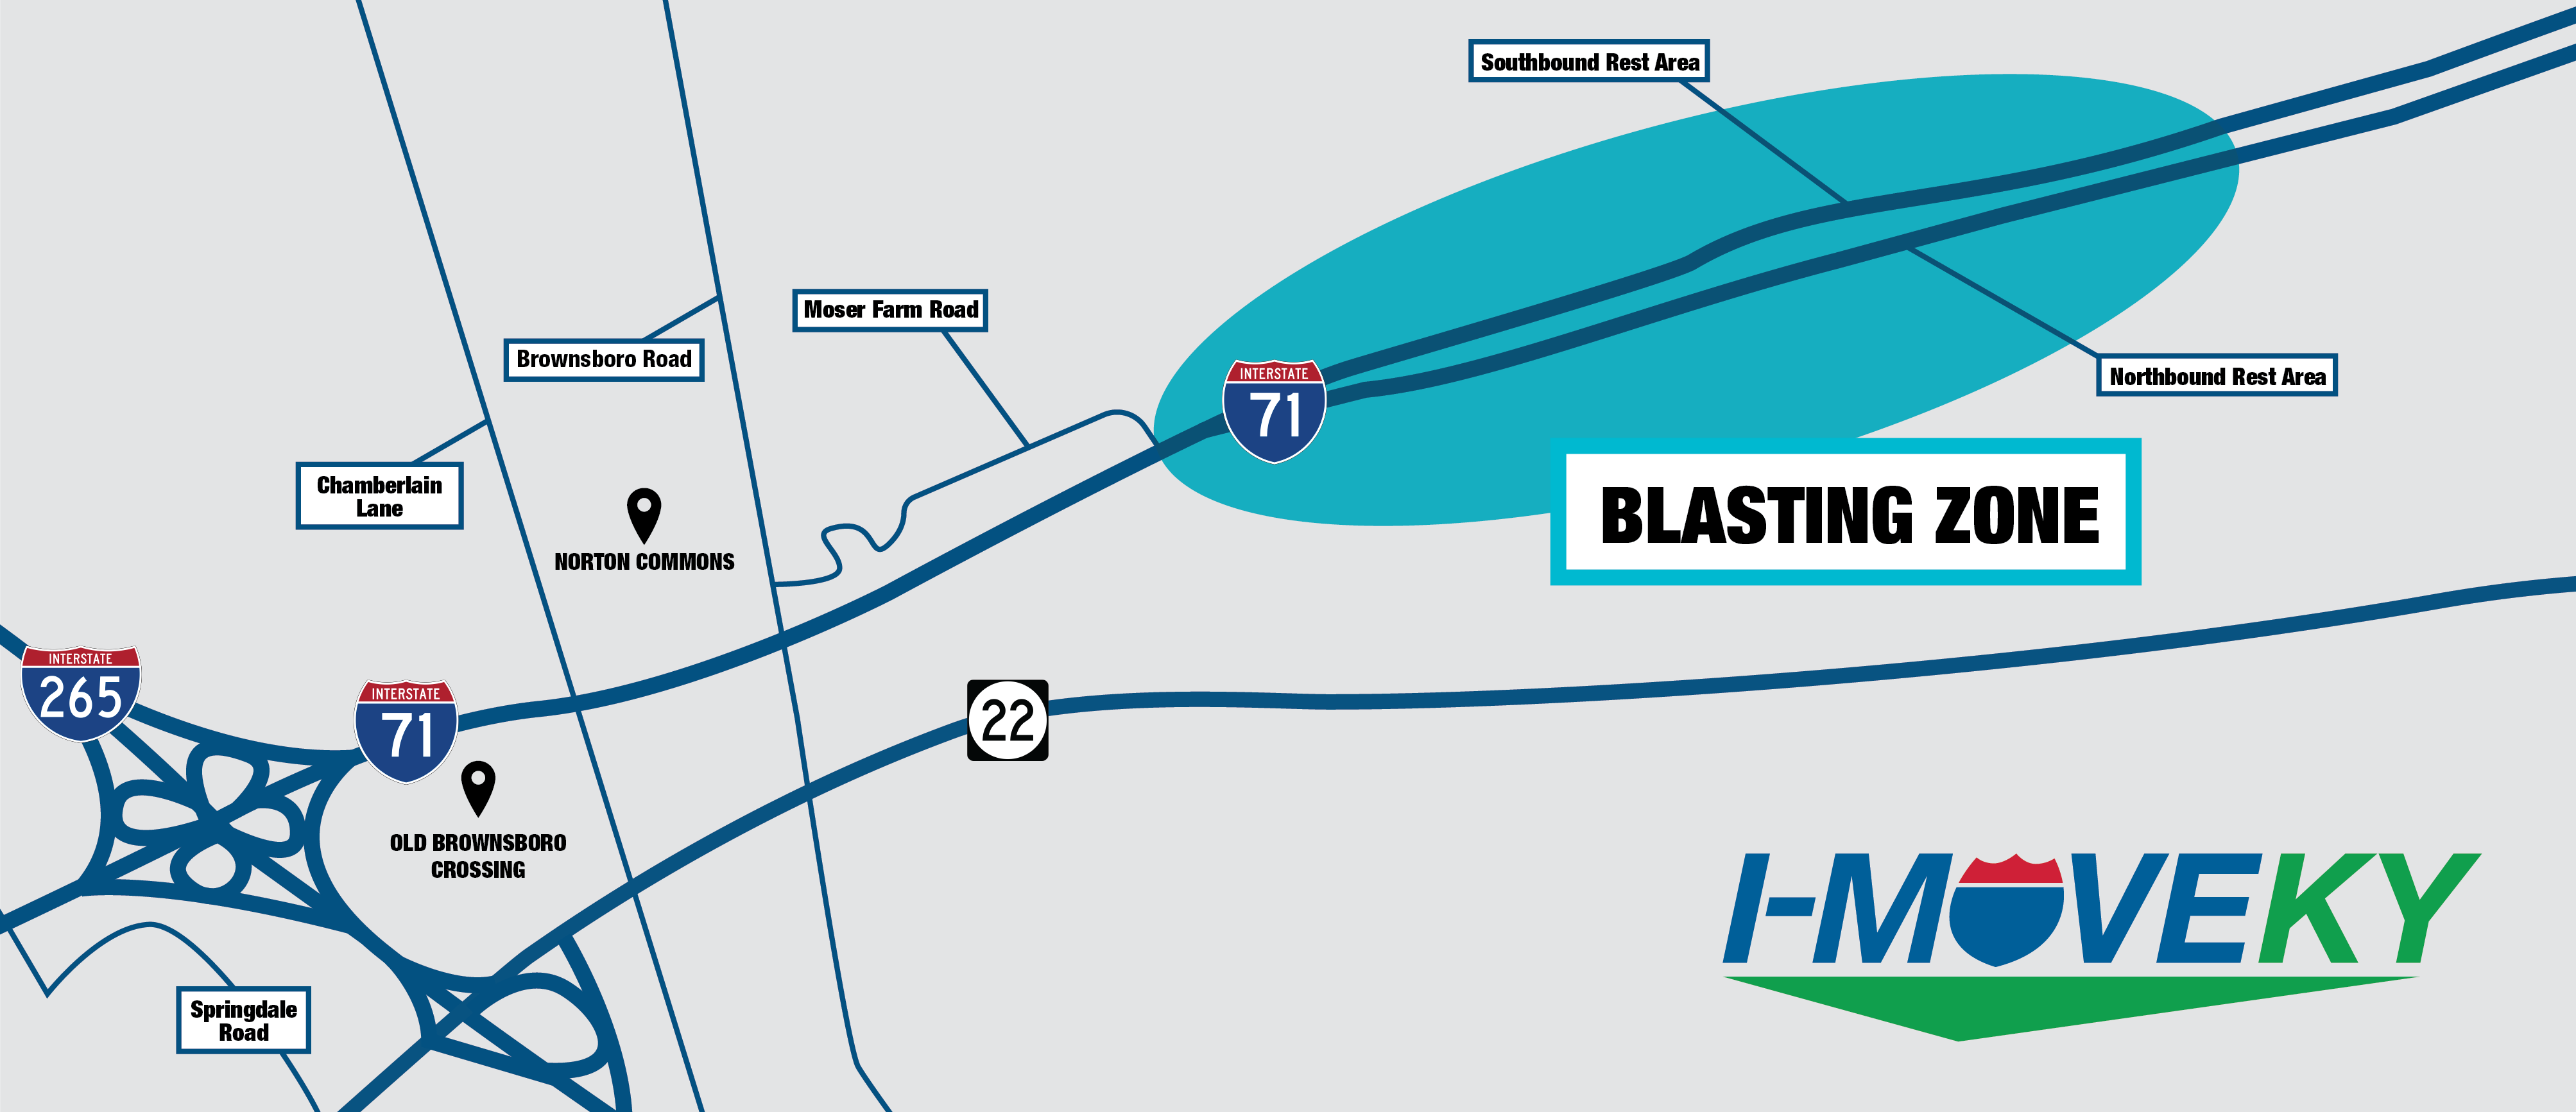 A map showing the blasting area. The map background is gray and the roads are navy blue. The blasting area is showing in a teal oval.